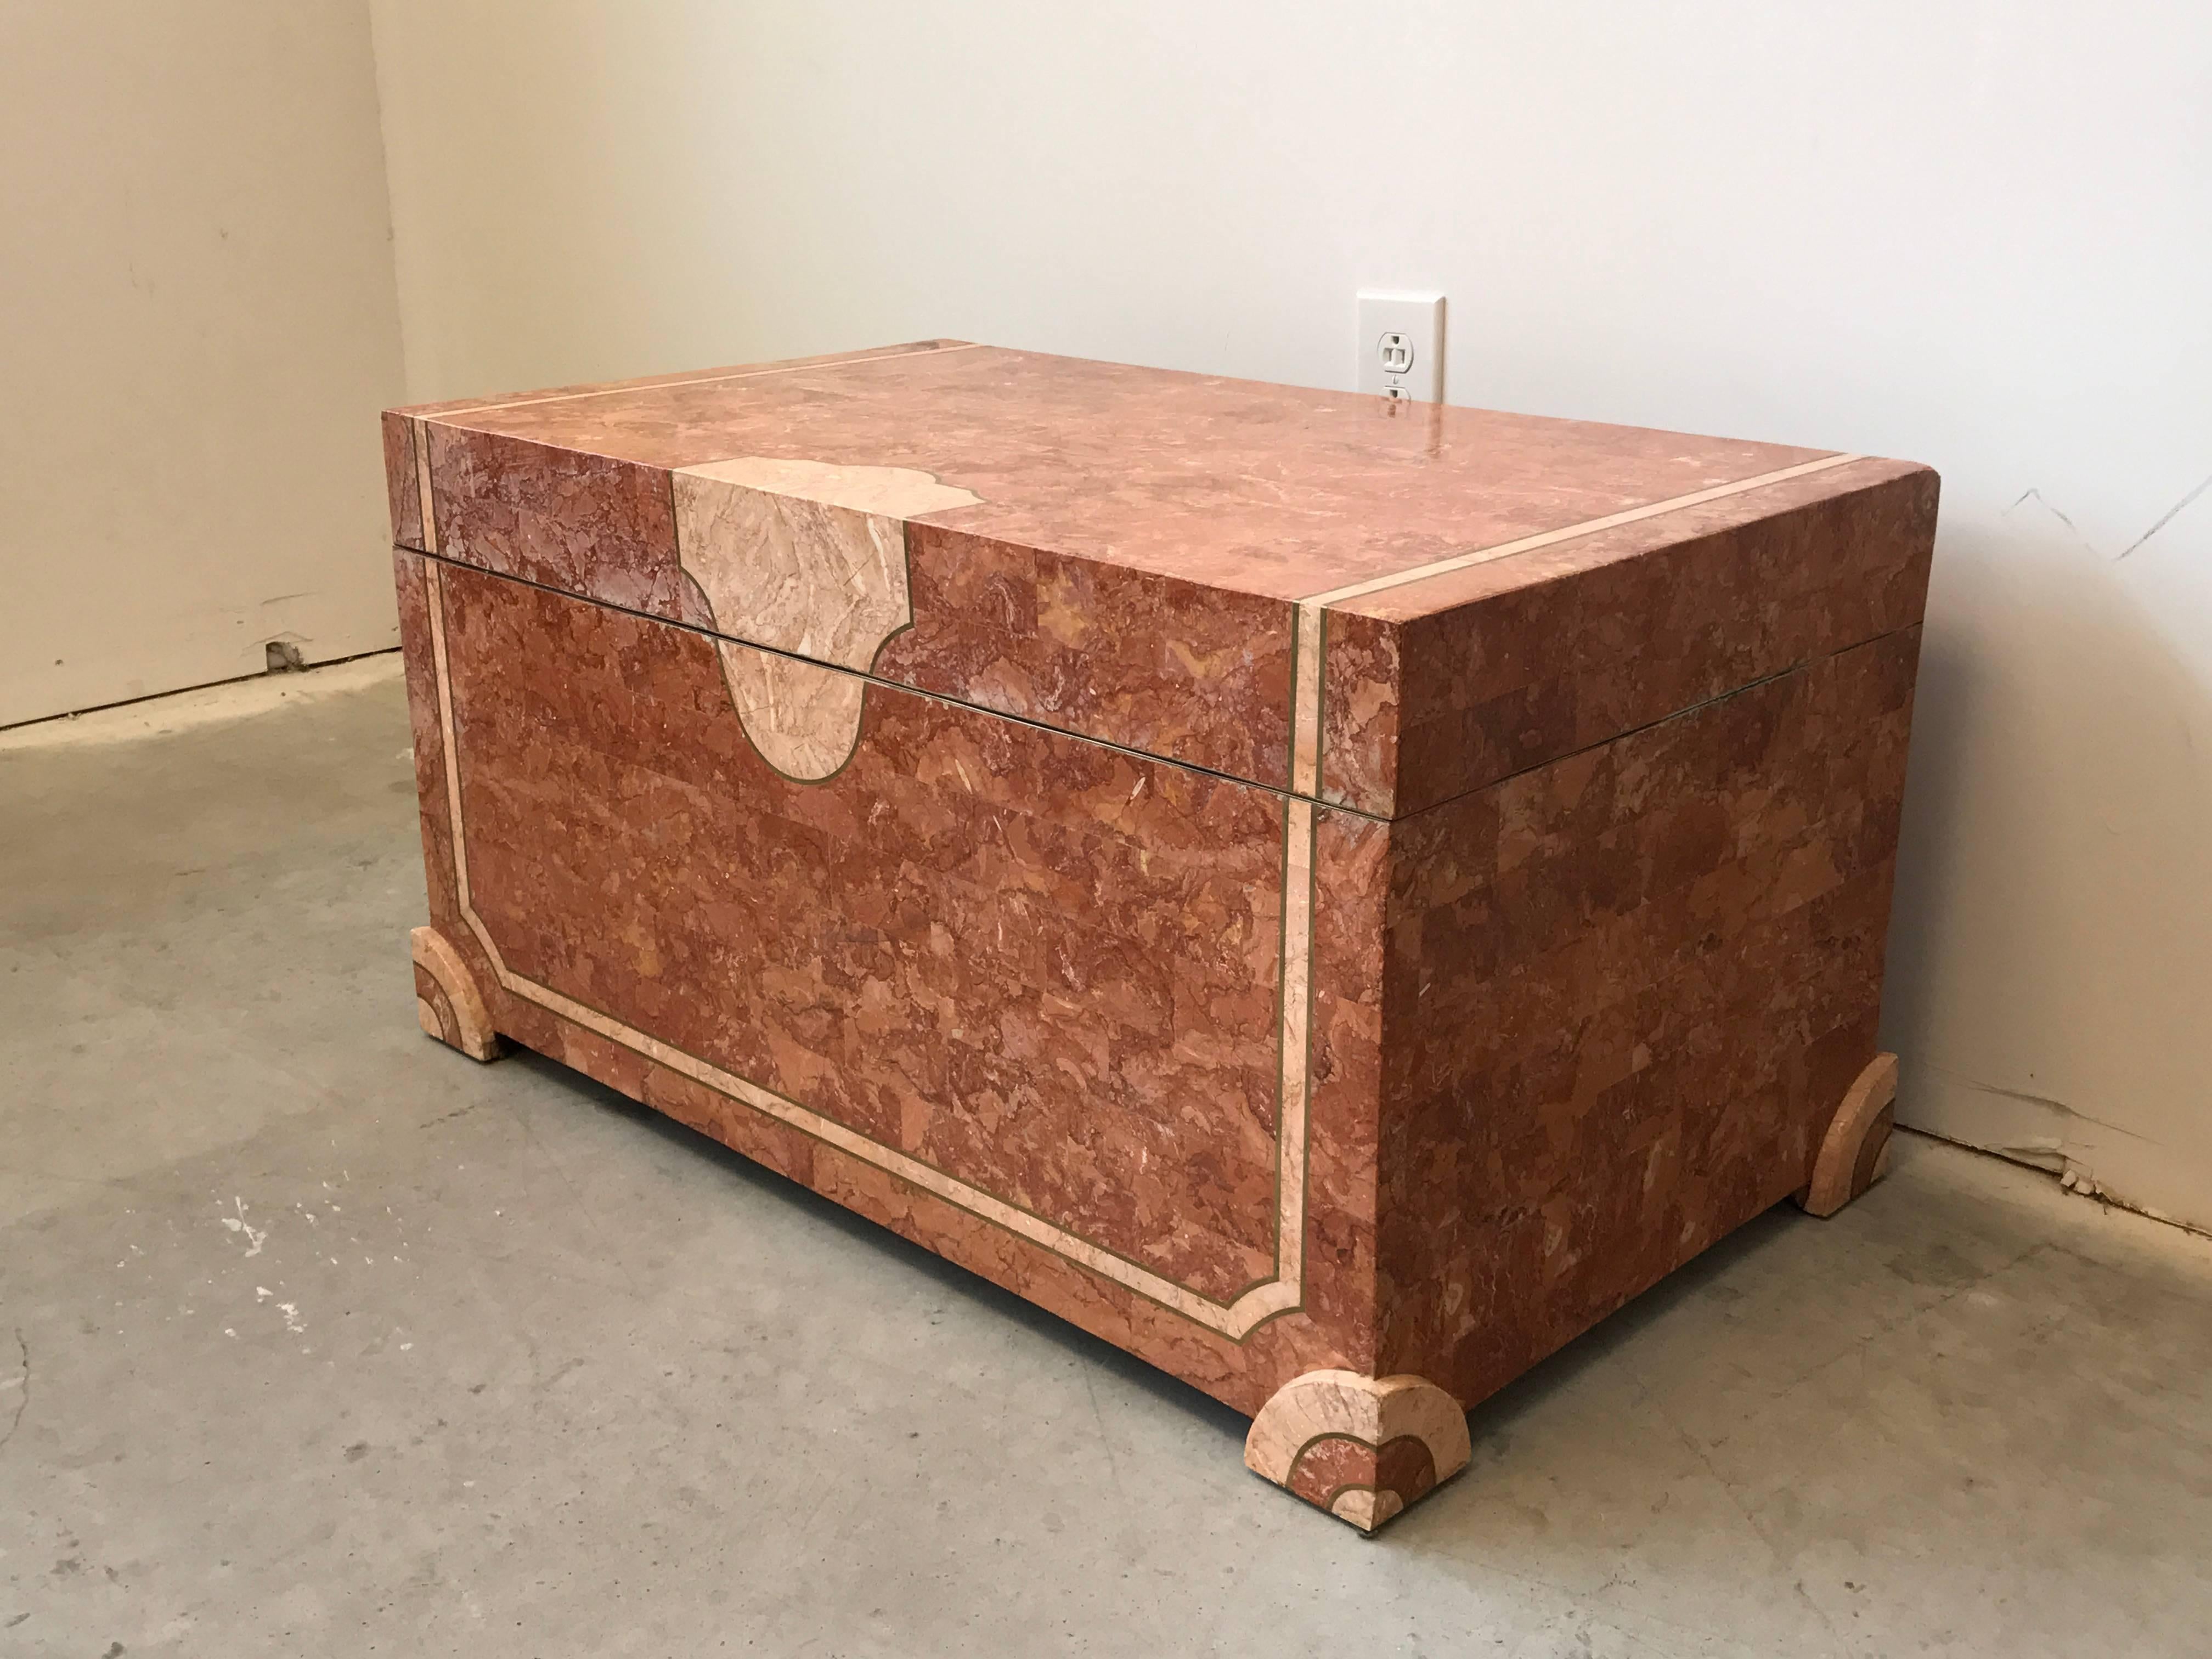 Offered is an exquisite, Robert Marcius for Casa Bique trunk, circa 1980s. Covered in tessellated marble stone of contrasting coral shades, with squared feet that have a contrasting rounded inner edge, adding sculptural detail to the piece. Brass